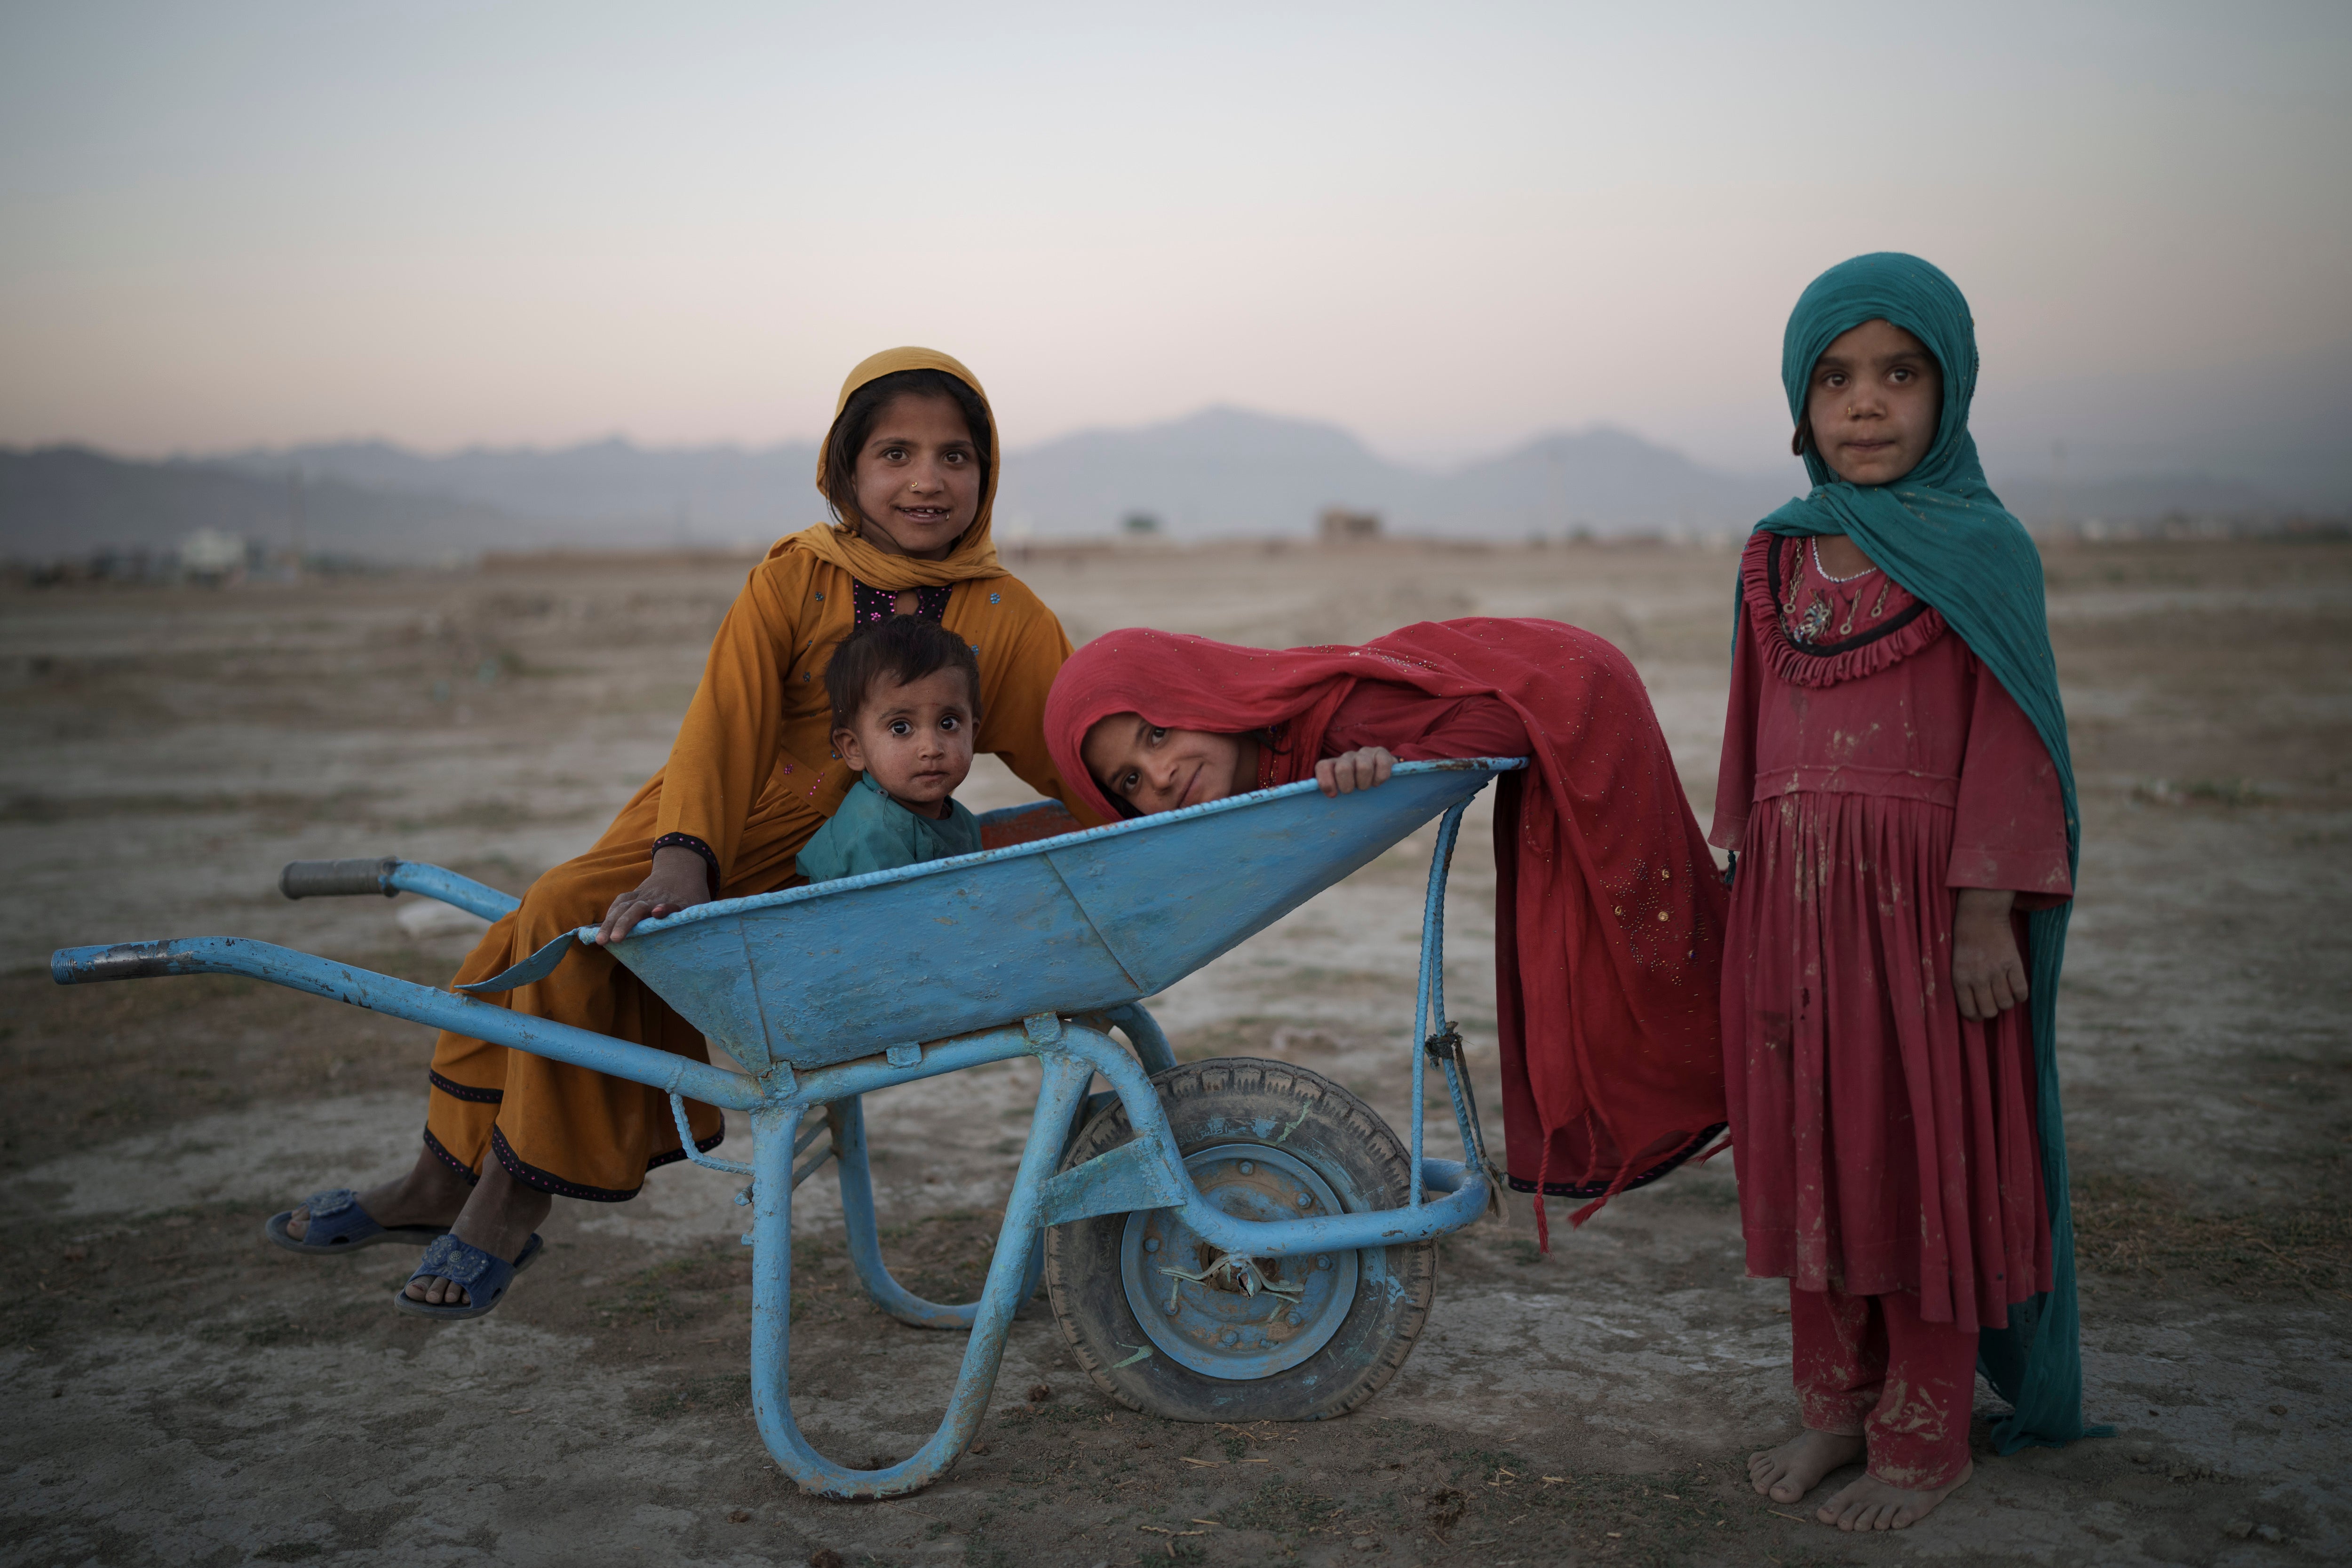 Afghanistan is currently gripped by human conflict, Covid and extreme drought